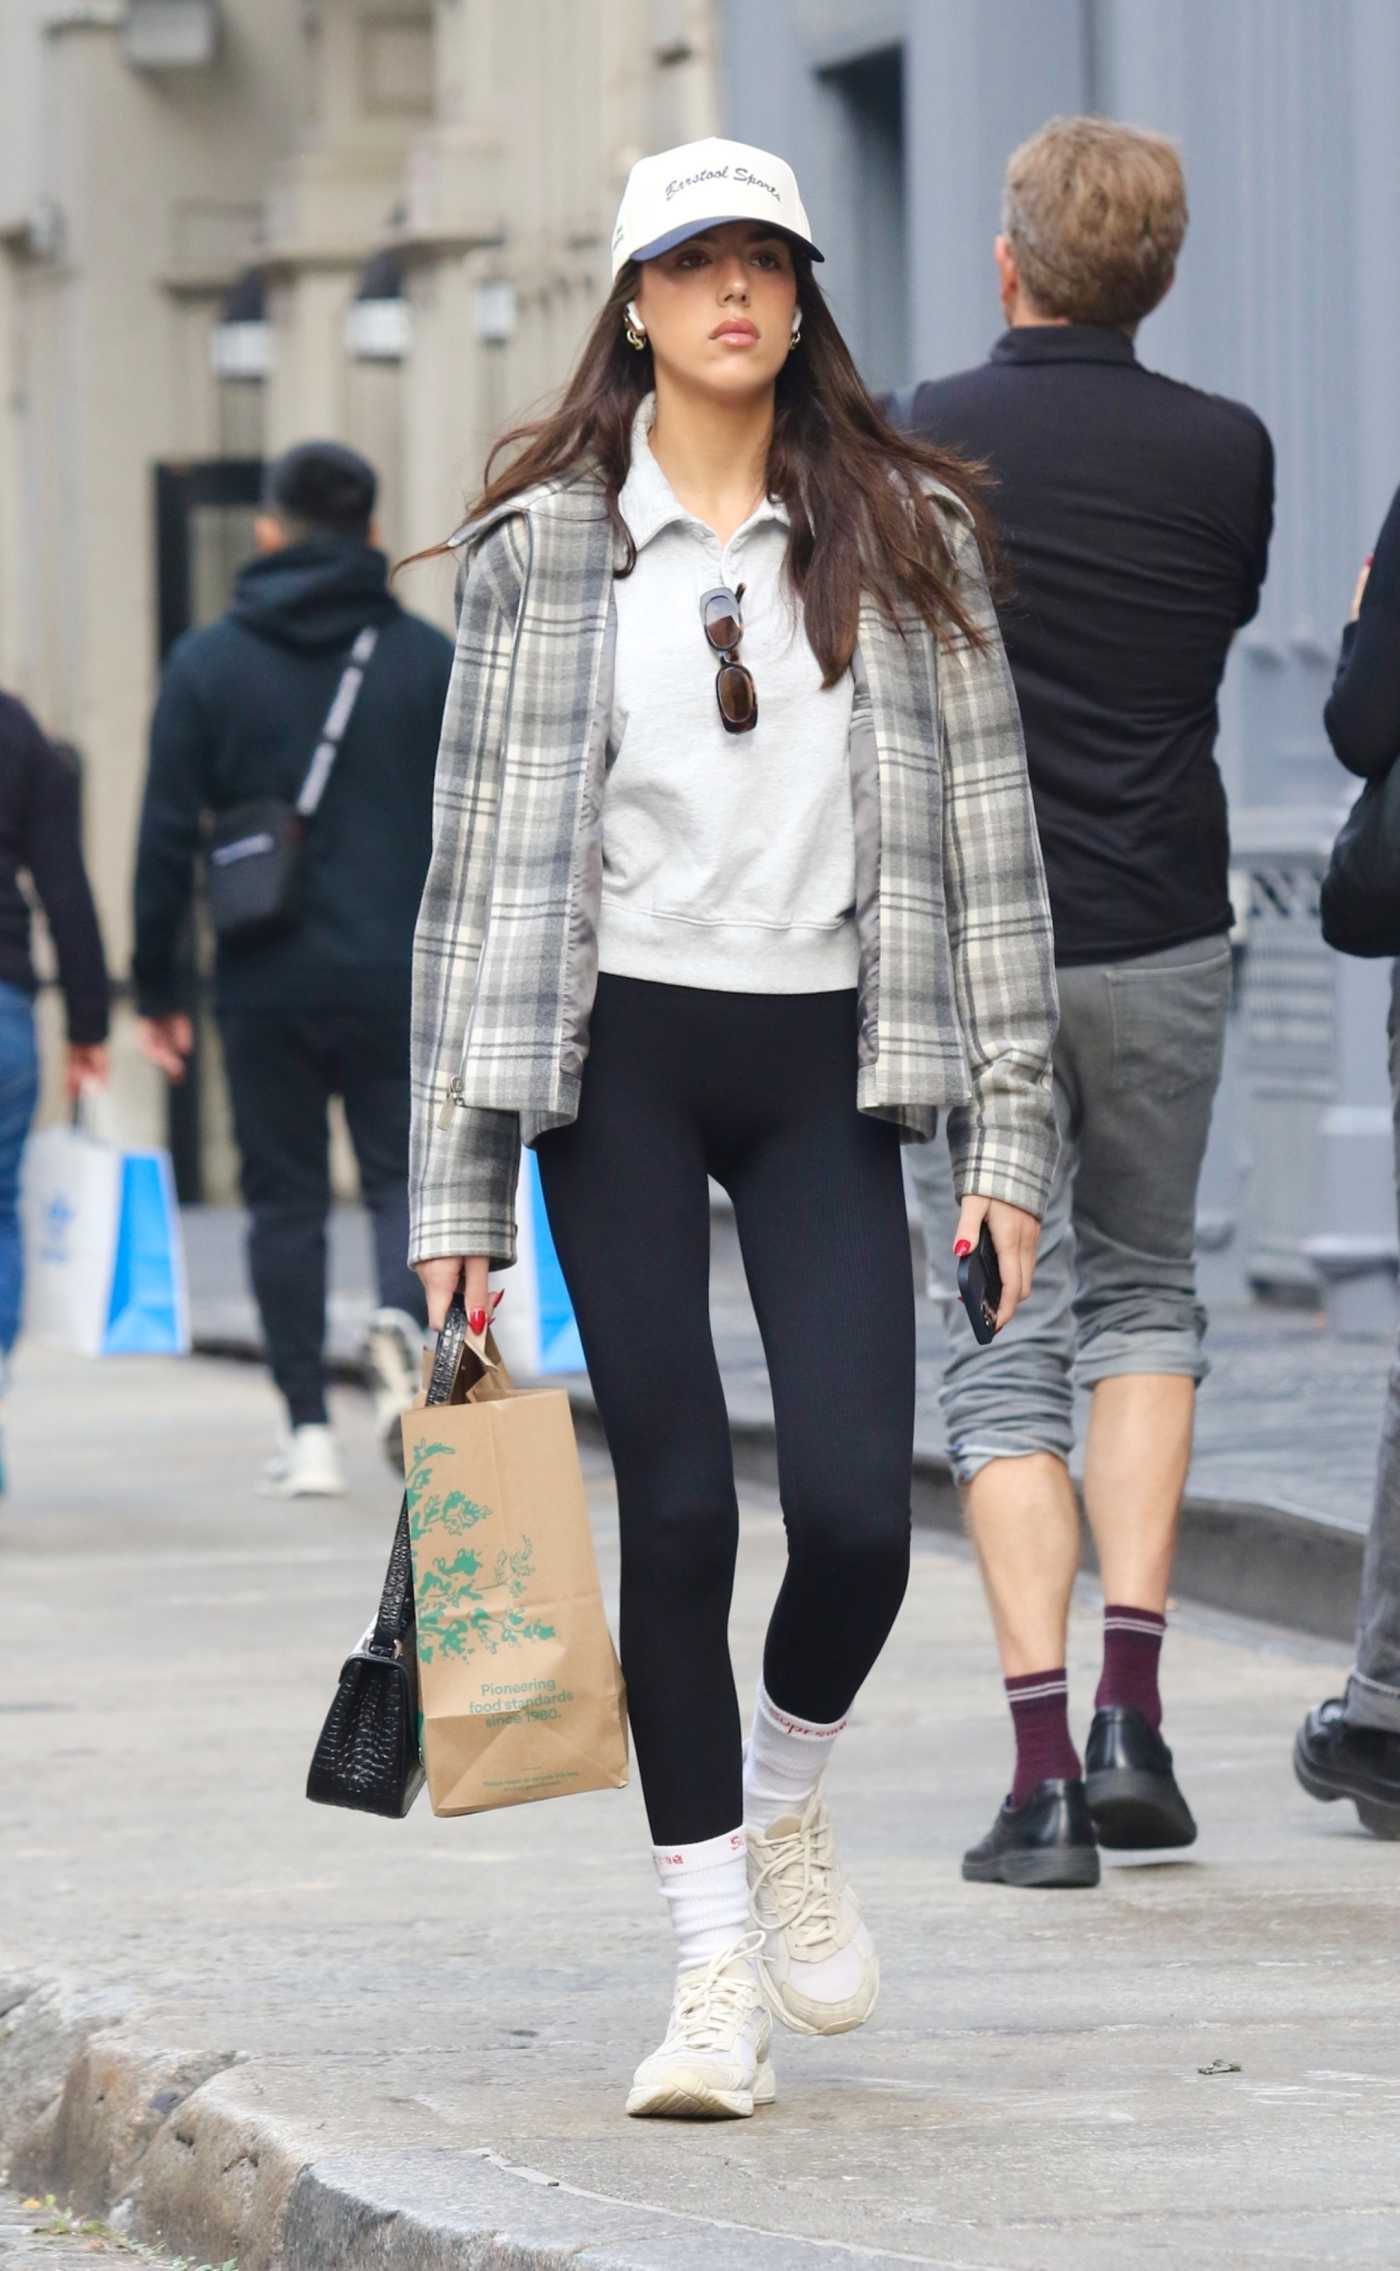 Sistine Stallone in a Plaid Jacket Was Seen After Shopping at Whole Foods Supermarket in Downtown Manhattan in NYC 10/19/2023